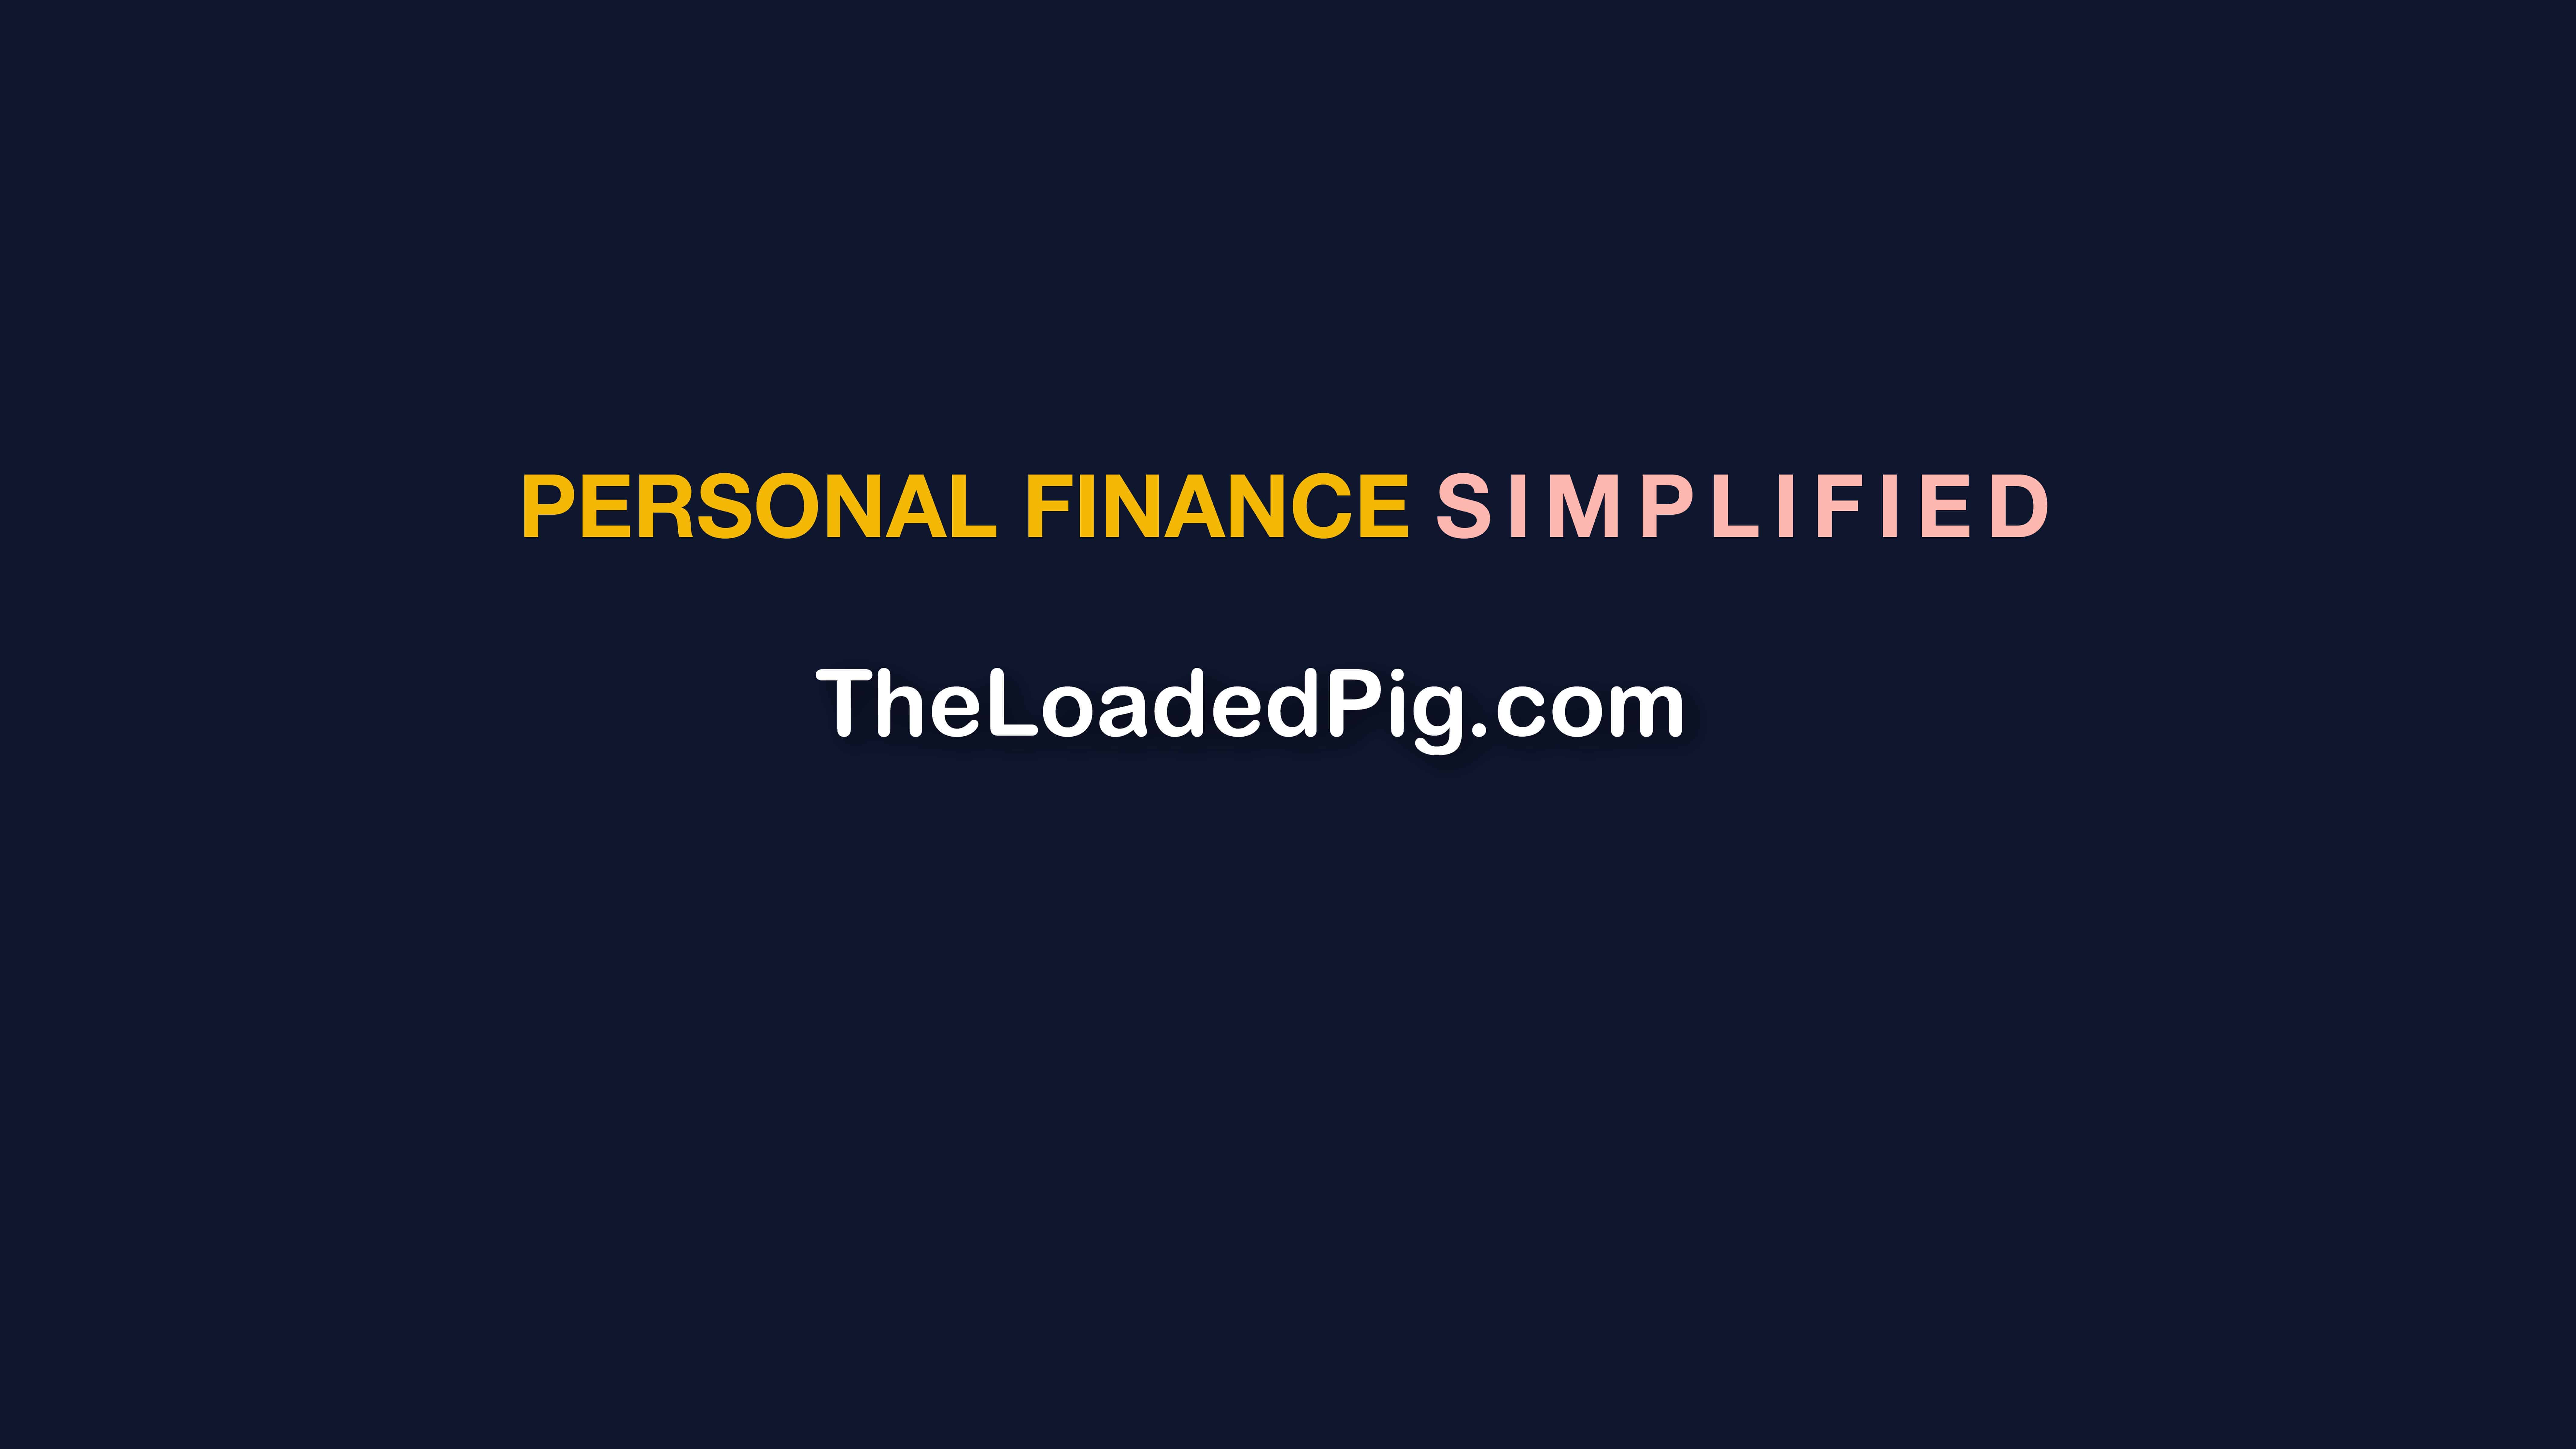 Text advertising a personal finance resource with the slogan 